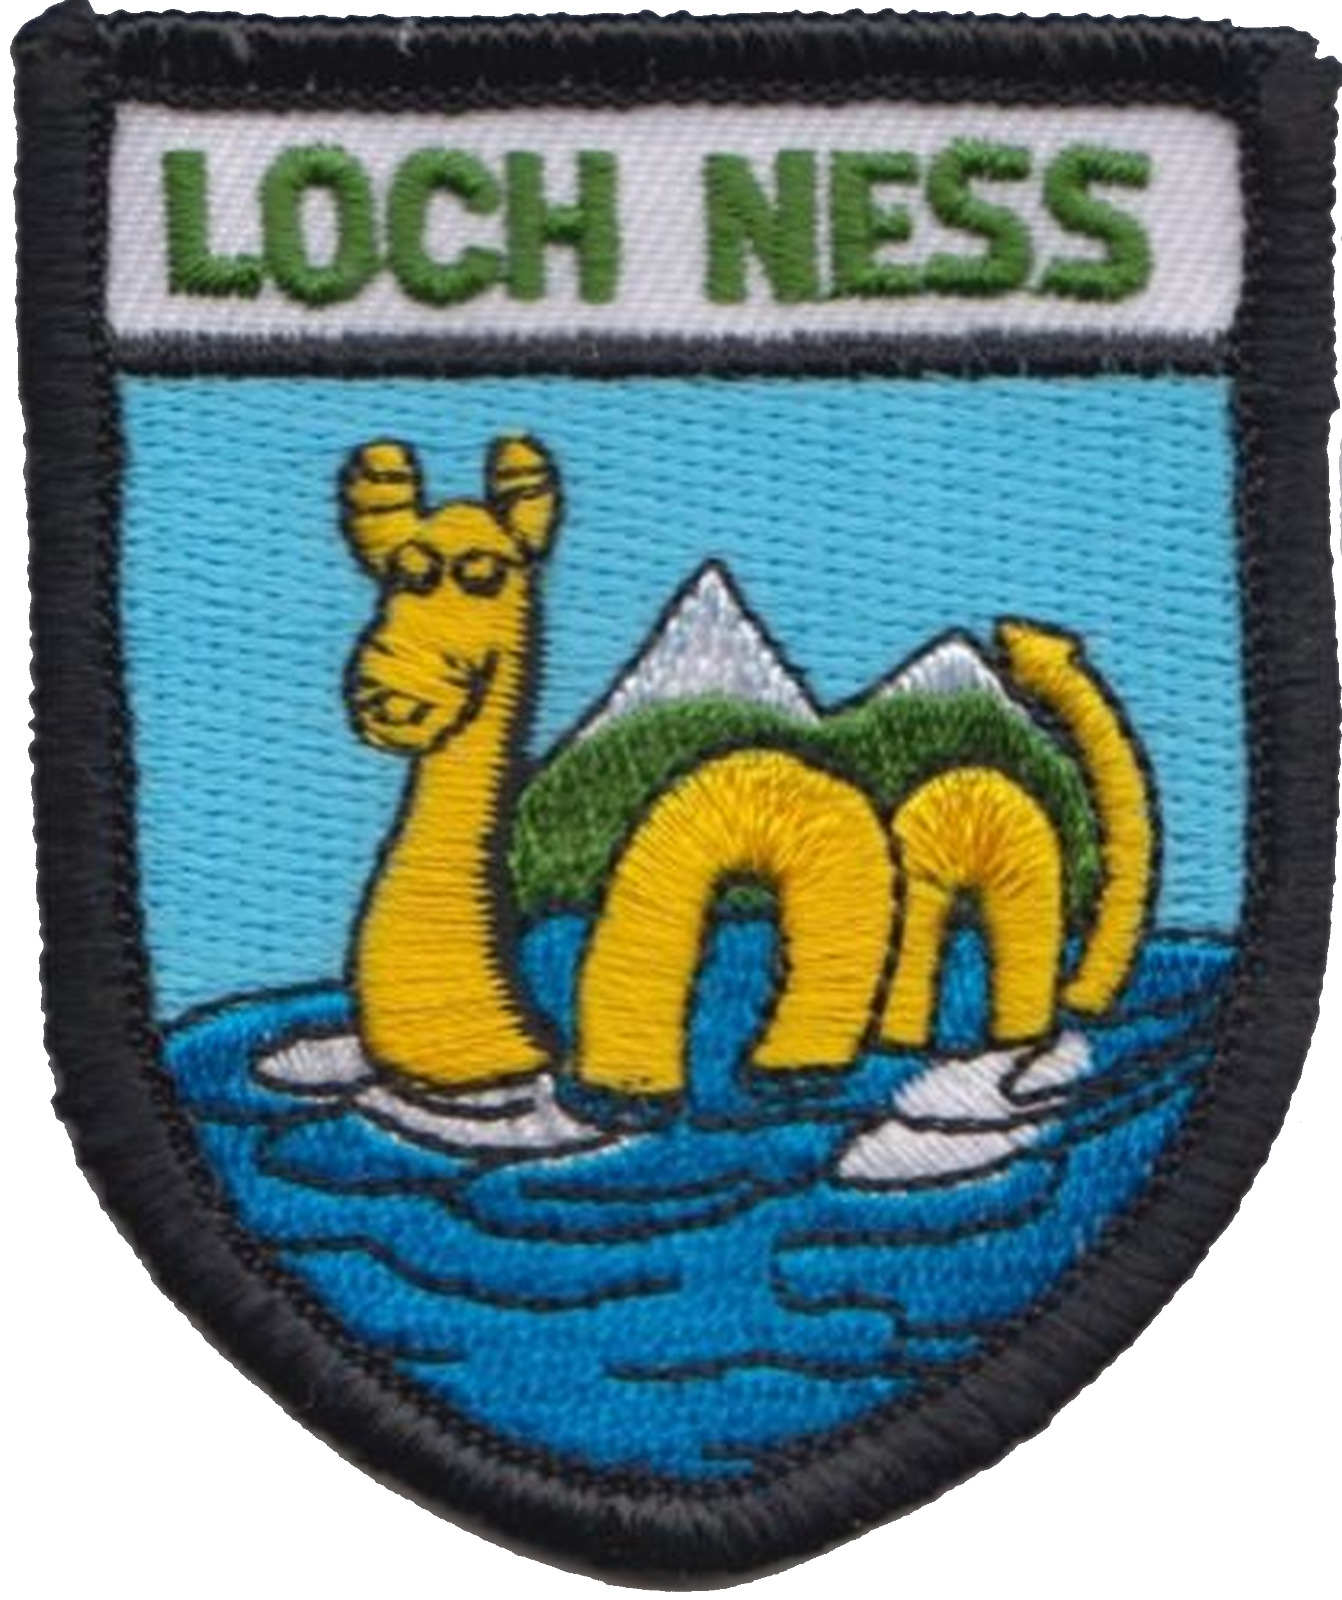 Loch Ness Monster Nessie Scotland Embroidered Patch